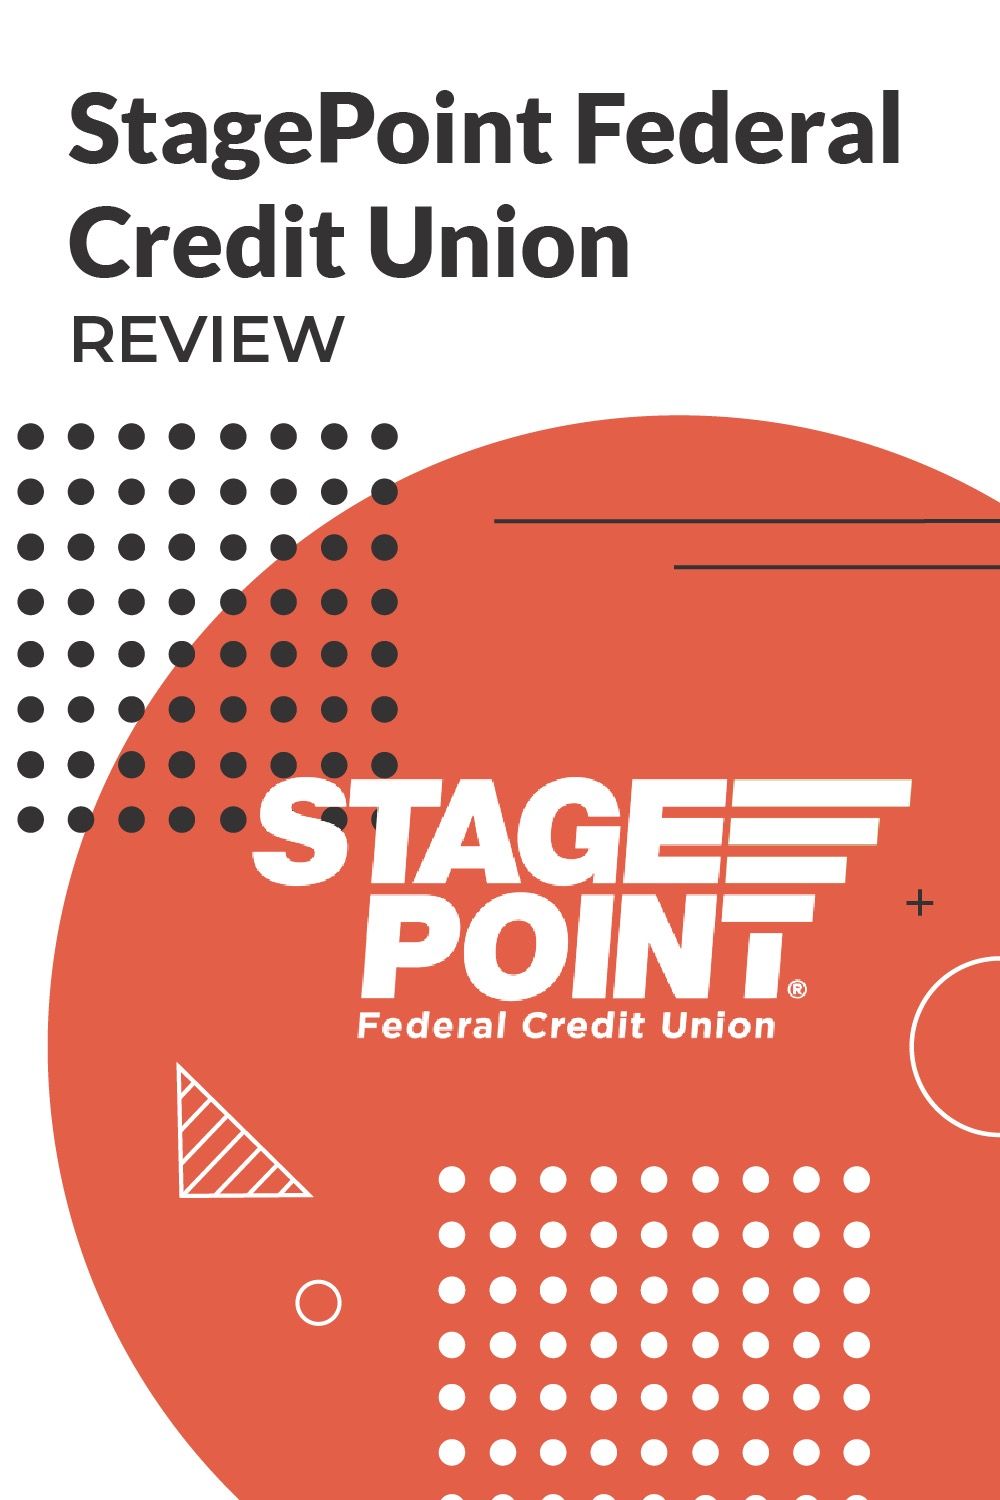 stagepoint federal credit union review pinterest image